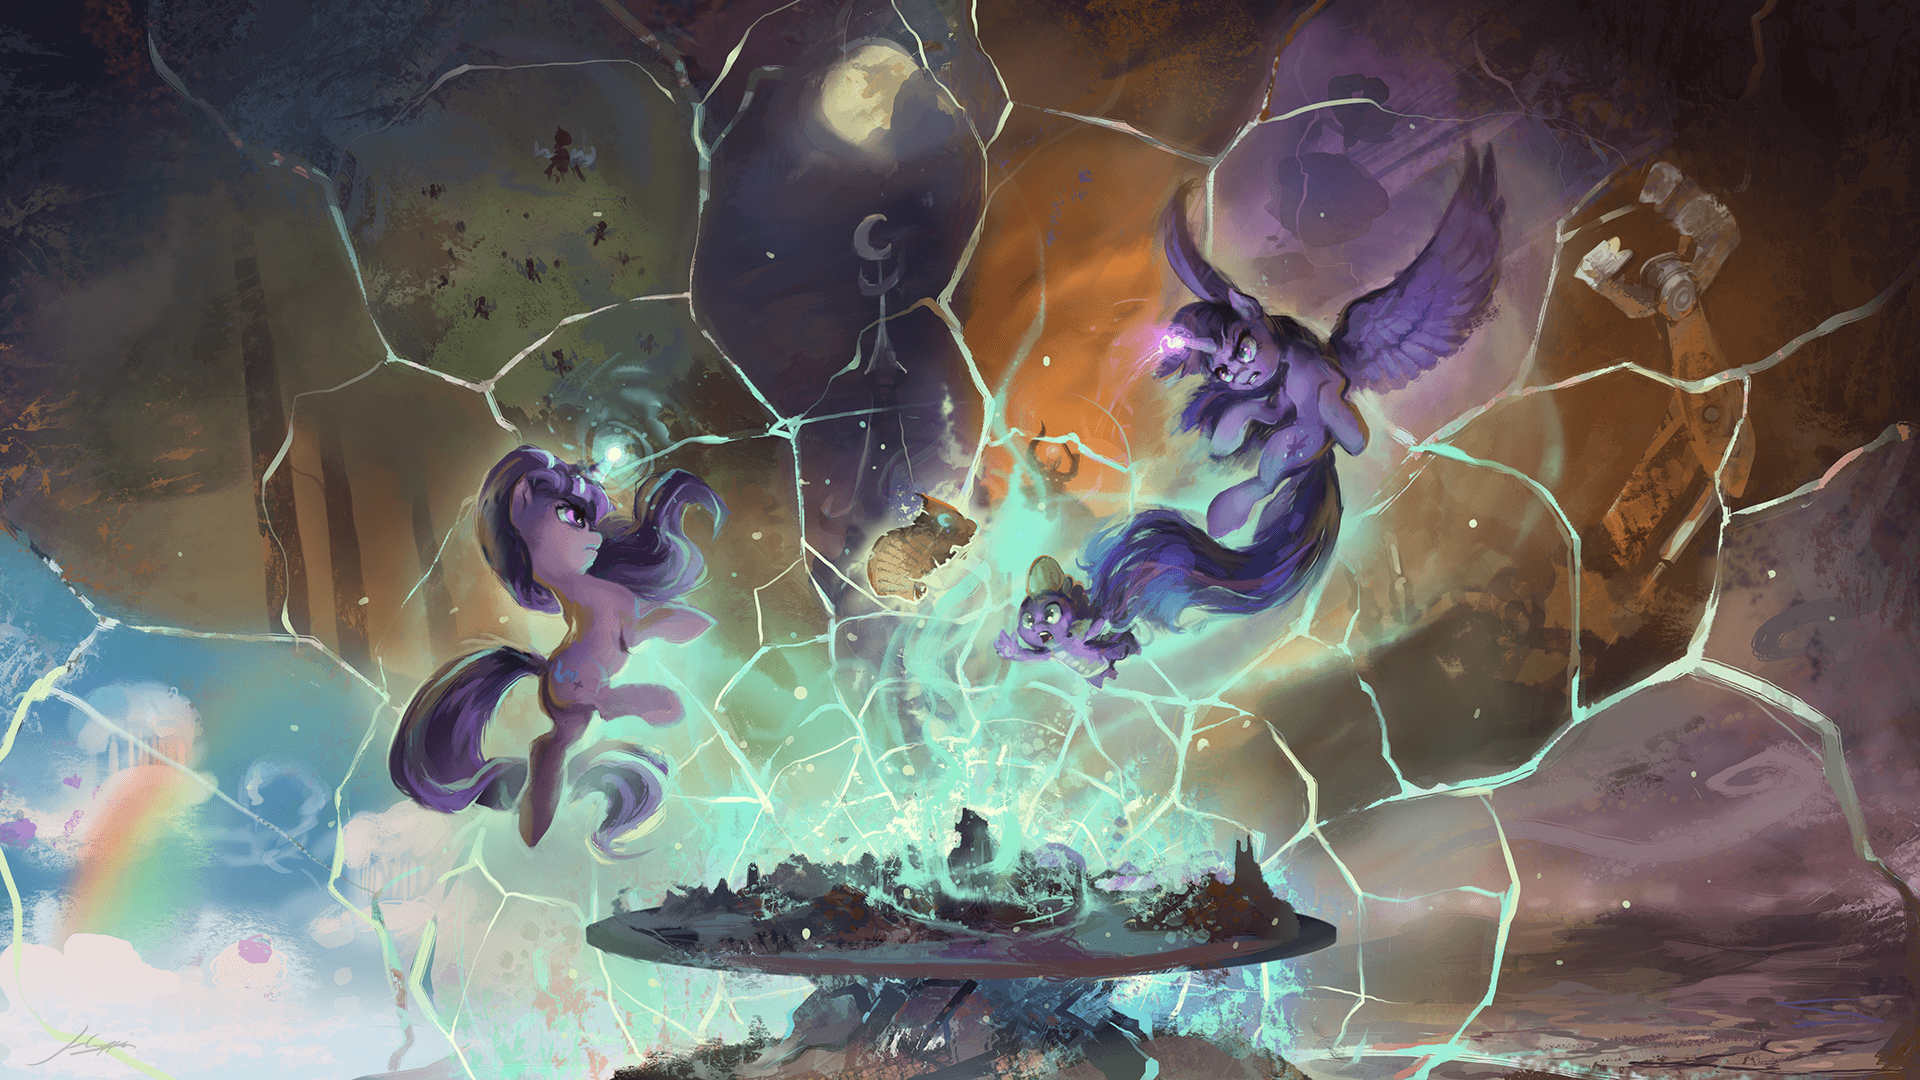 Lost in Time, Lost in Space. My Little Pony: Friendship is Magic